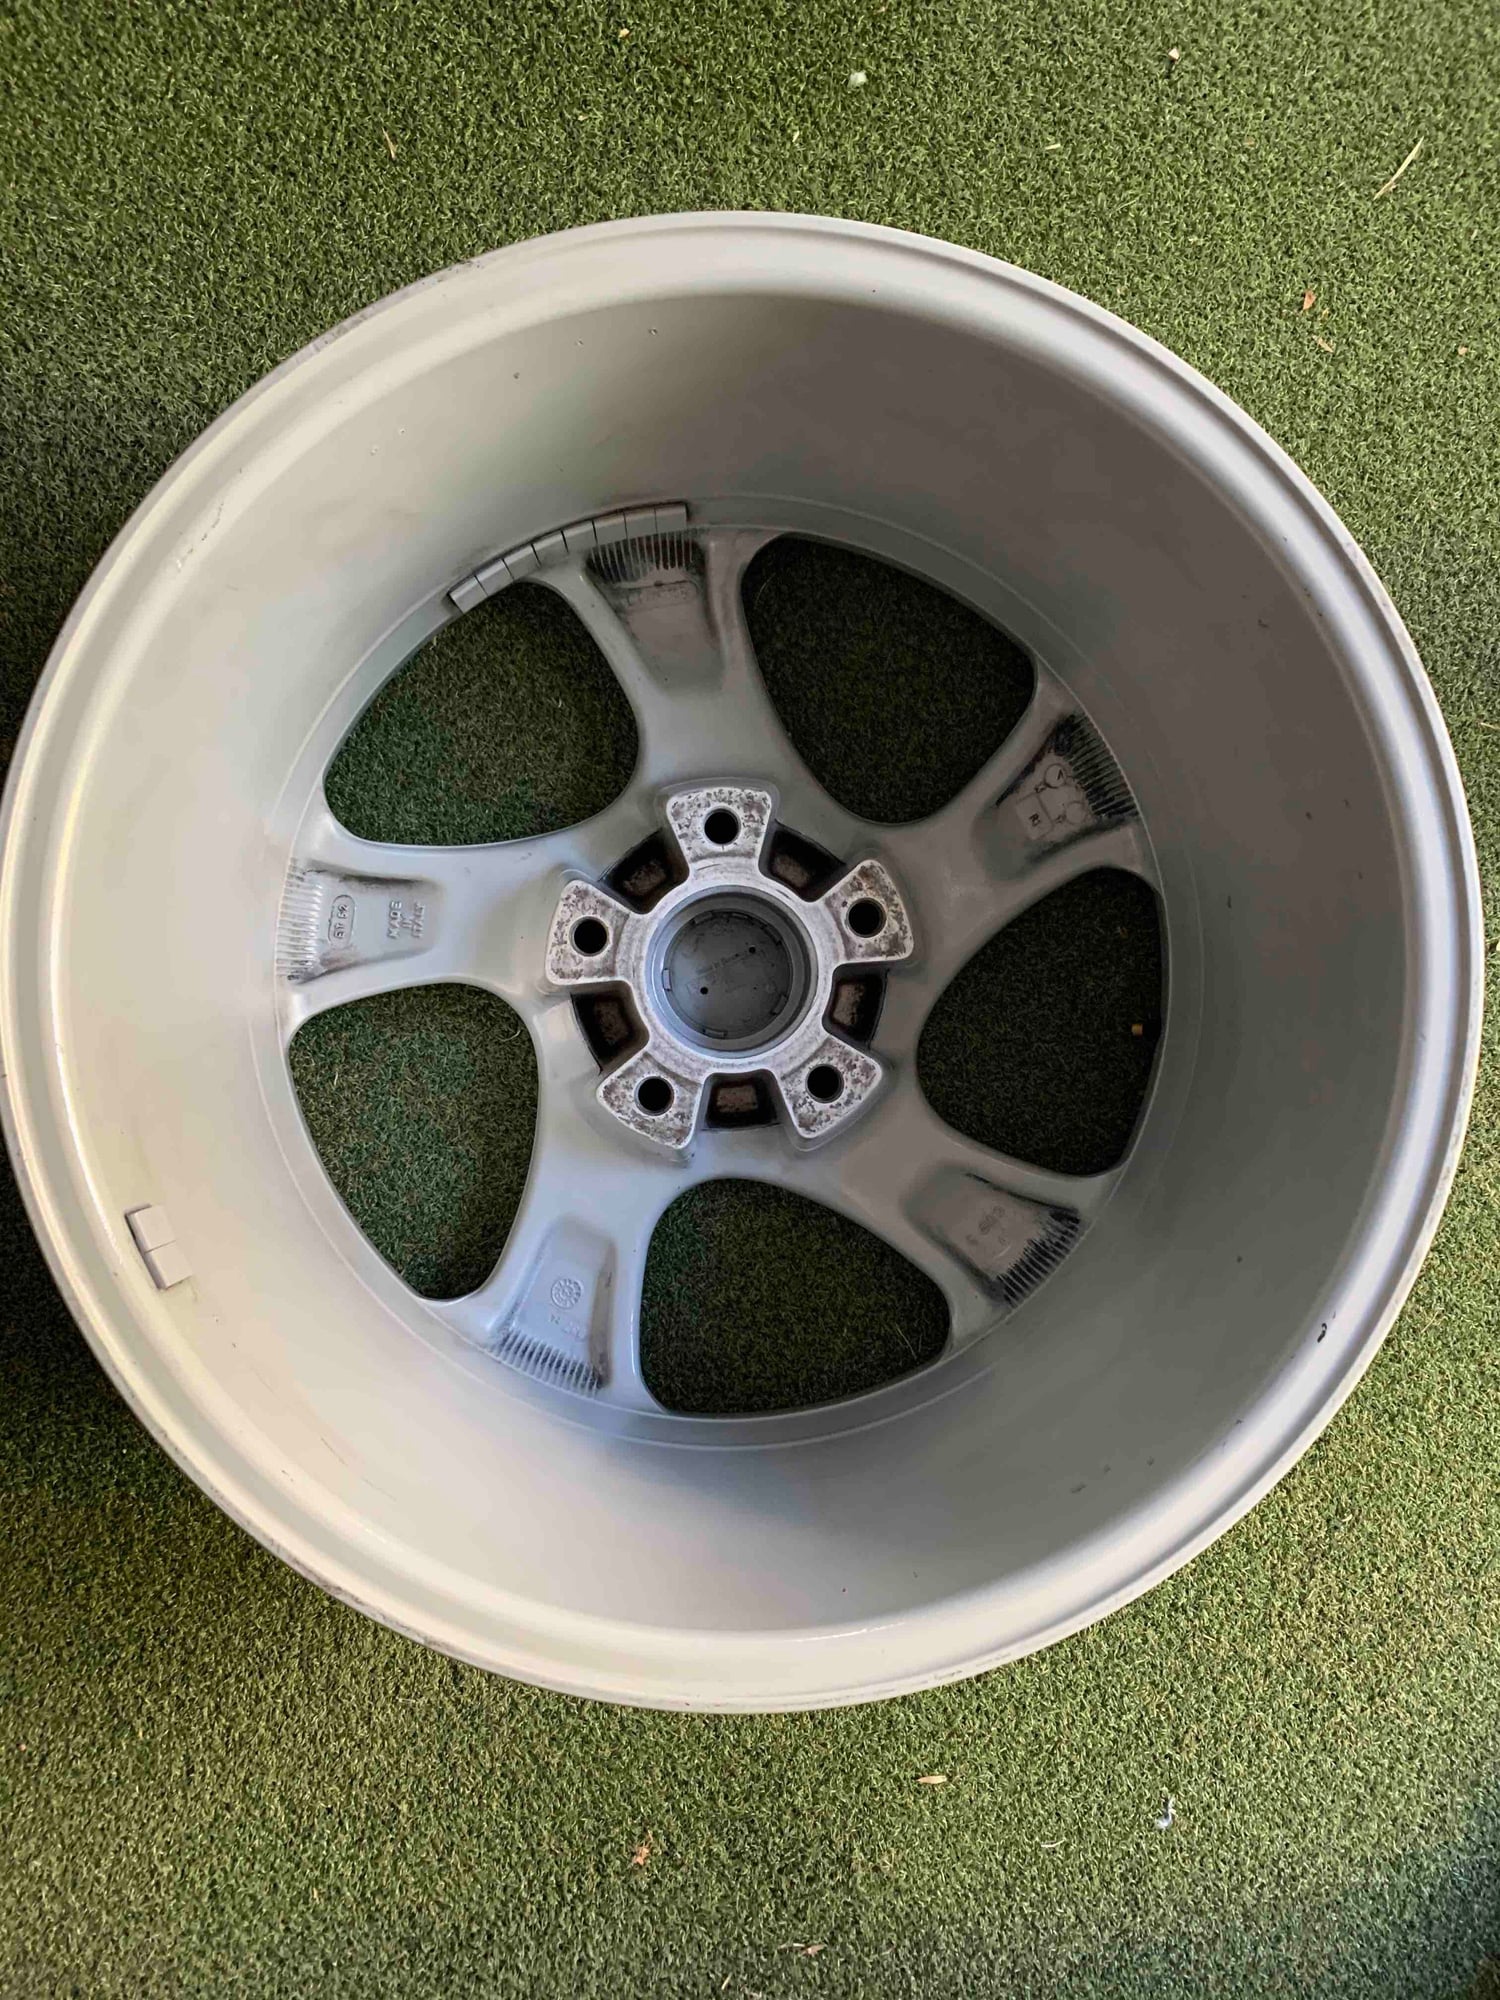 Wheels and Tires/Axles - 18" Turbo Twist look Mille Miglia in 9.9/10 condition, LA pick up - Used - 1995 to 2004 Porsche 911 - Los Angeles, CA 90280, United States